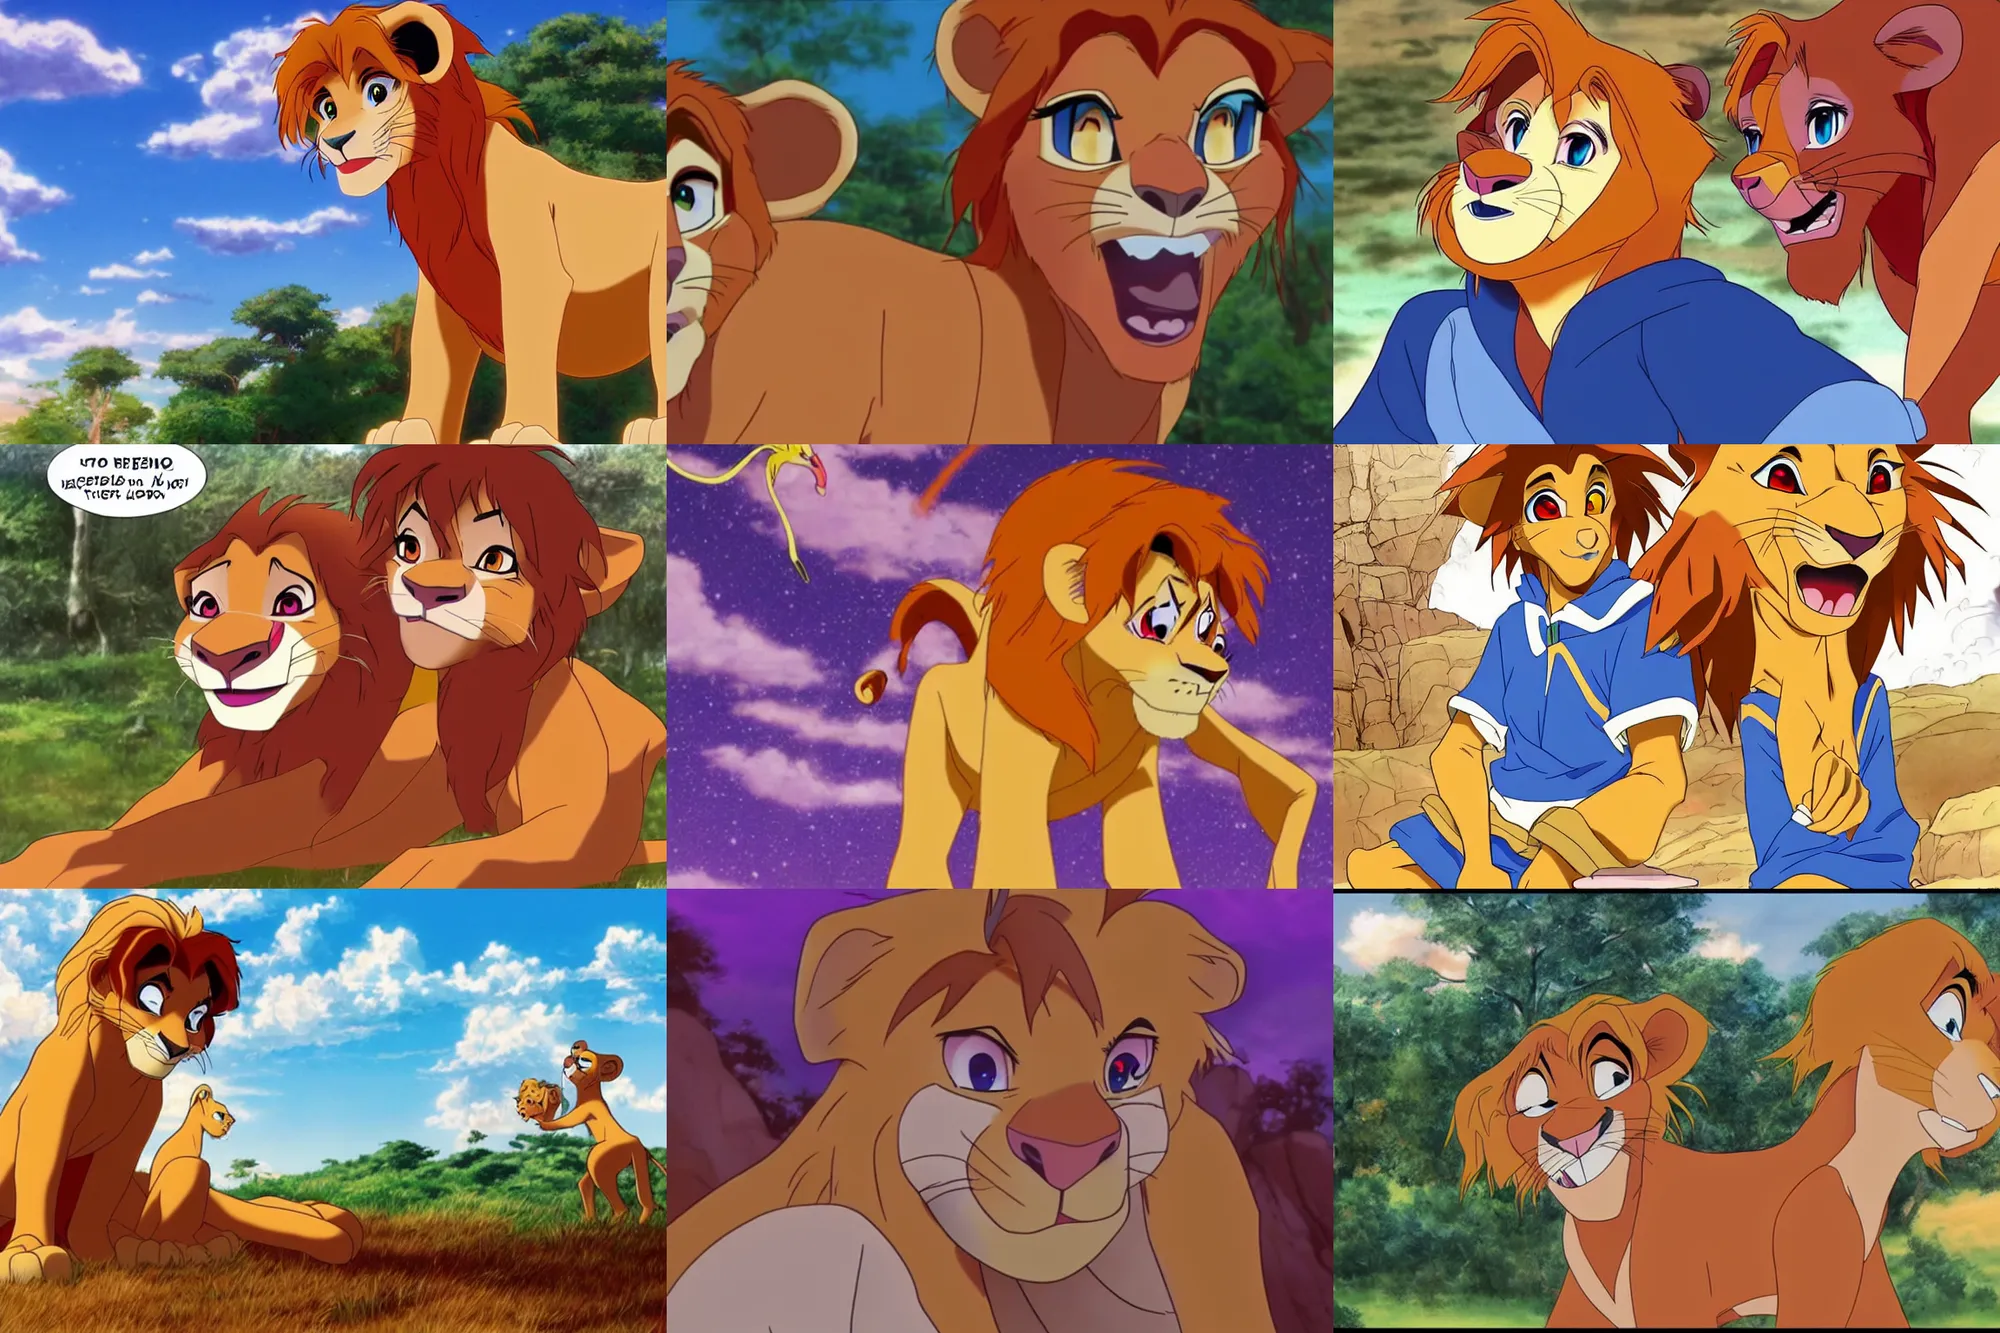 Image similar to simba from the lion king trapped in anime purgatory until he figures it's full of cringe, has a nervous breakdown, and retreats into highschool rp with his tulpas